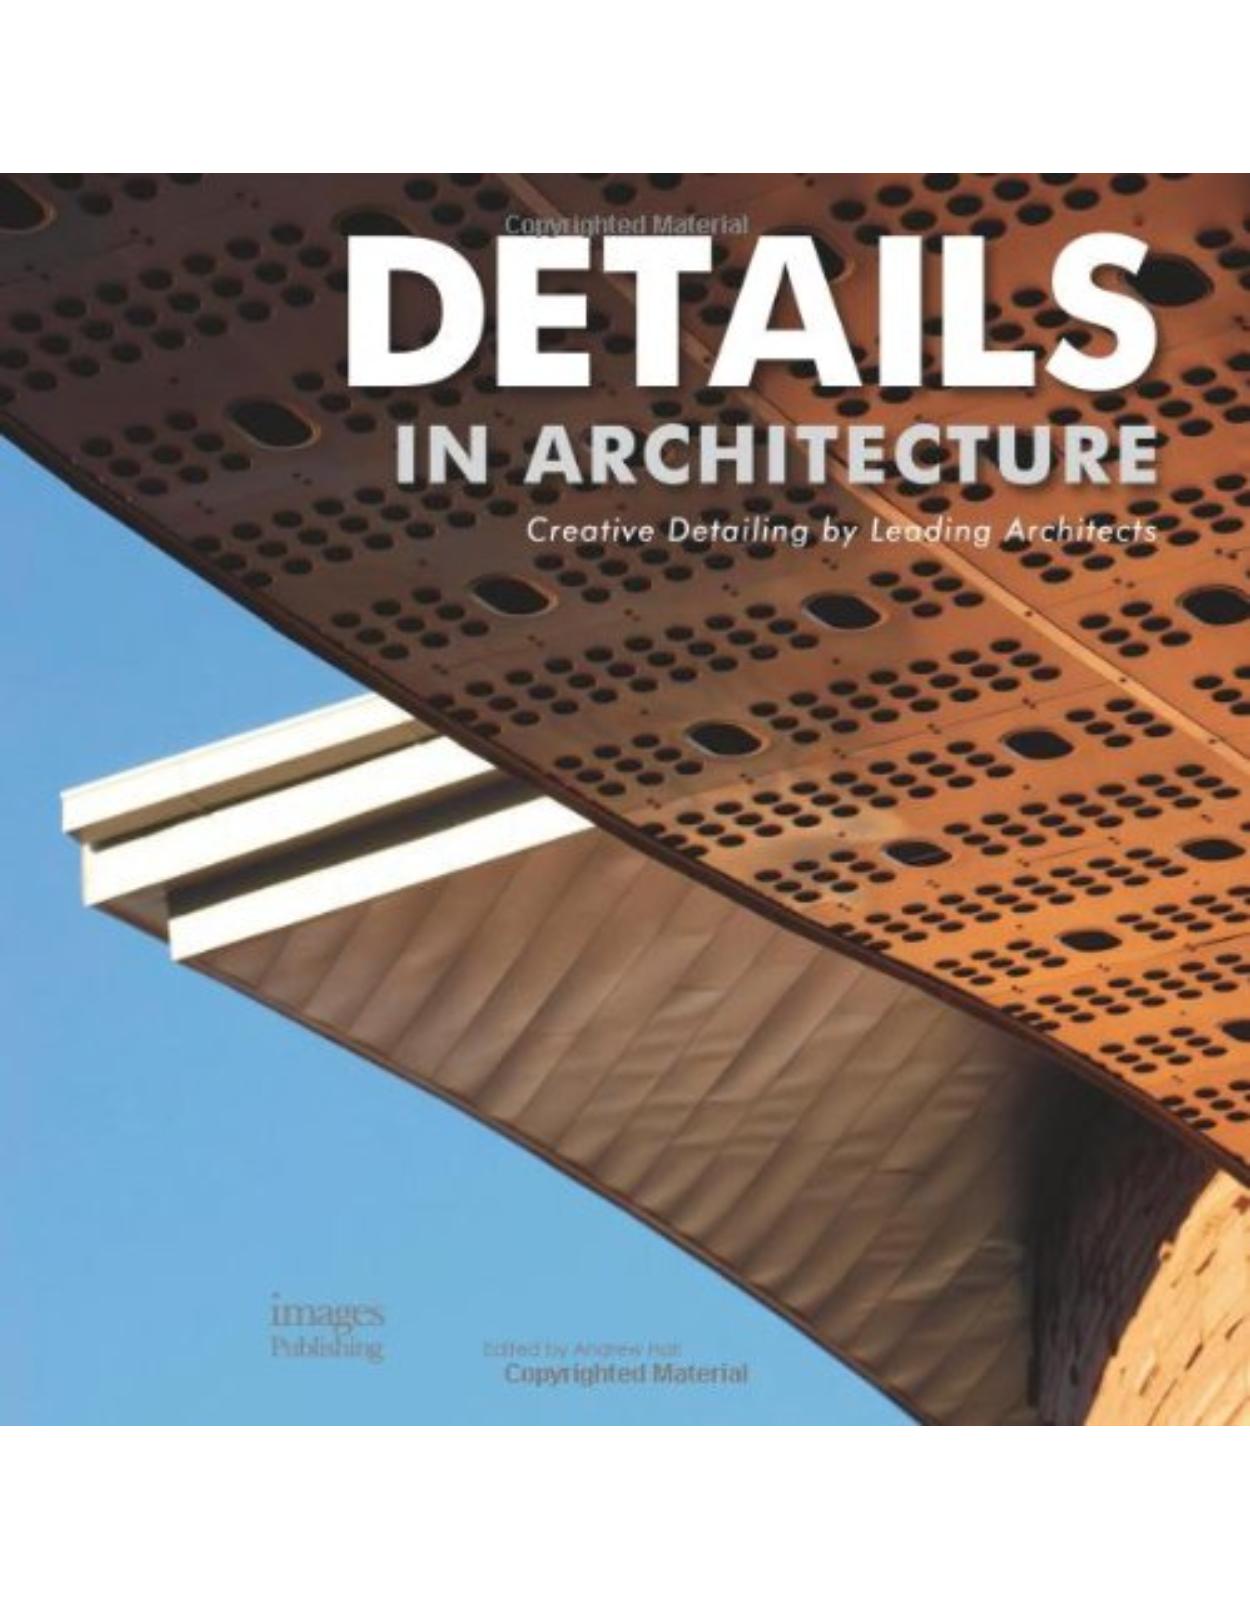 Details in Architecture: Creative Detailing by Leading Architects